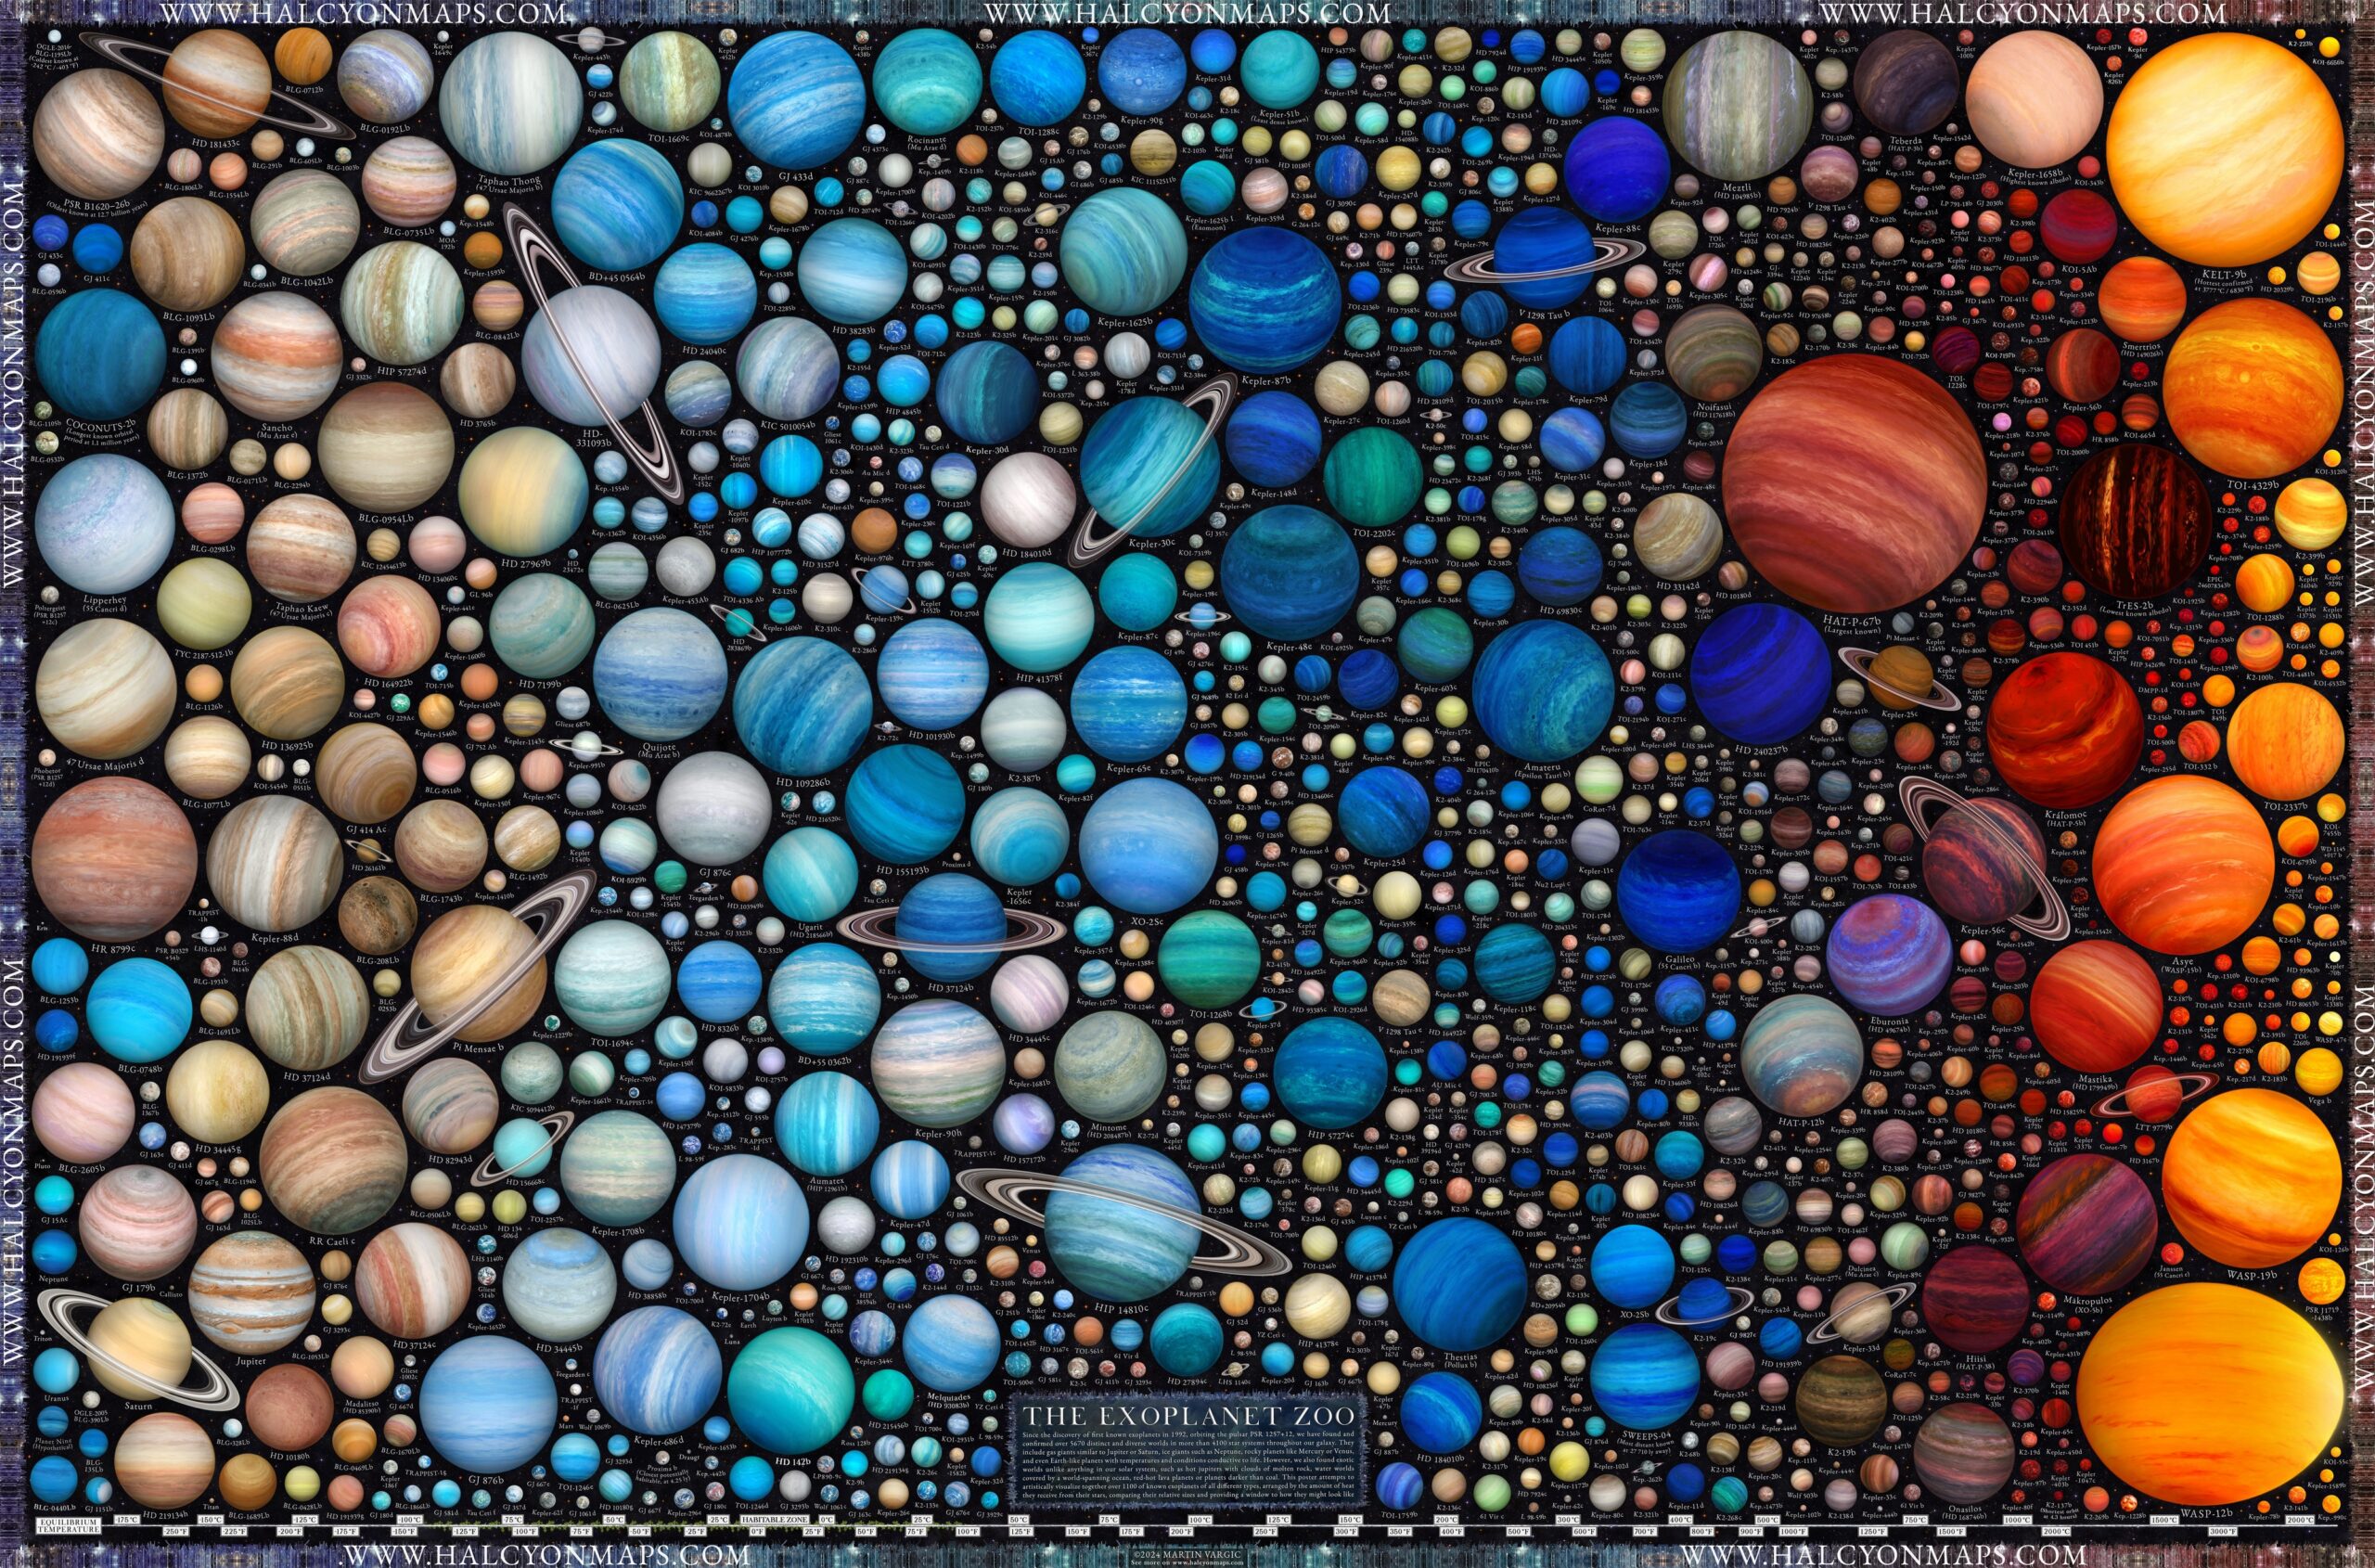 An amateur astronomer spent half a year creating surprisingly detailed infographics of 1600 exoplanets